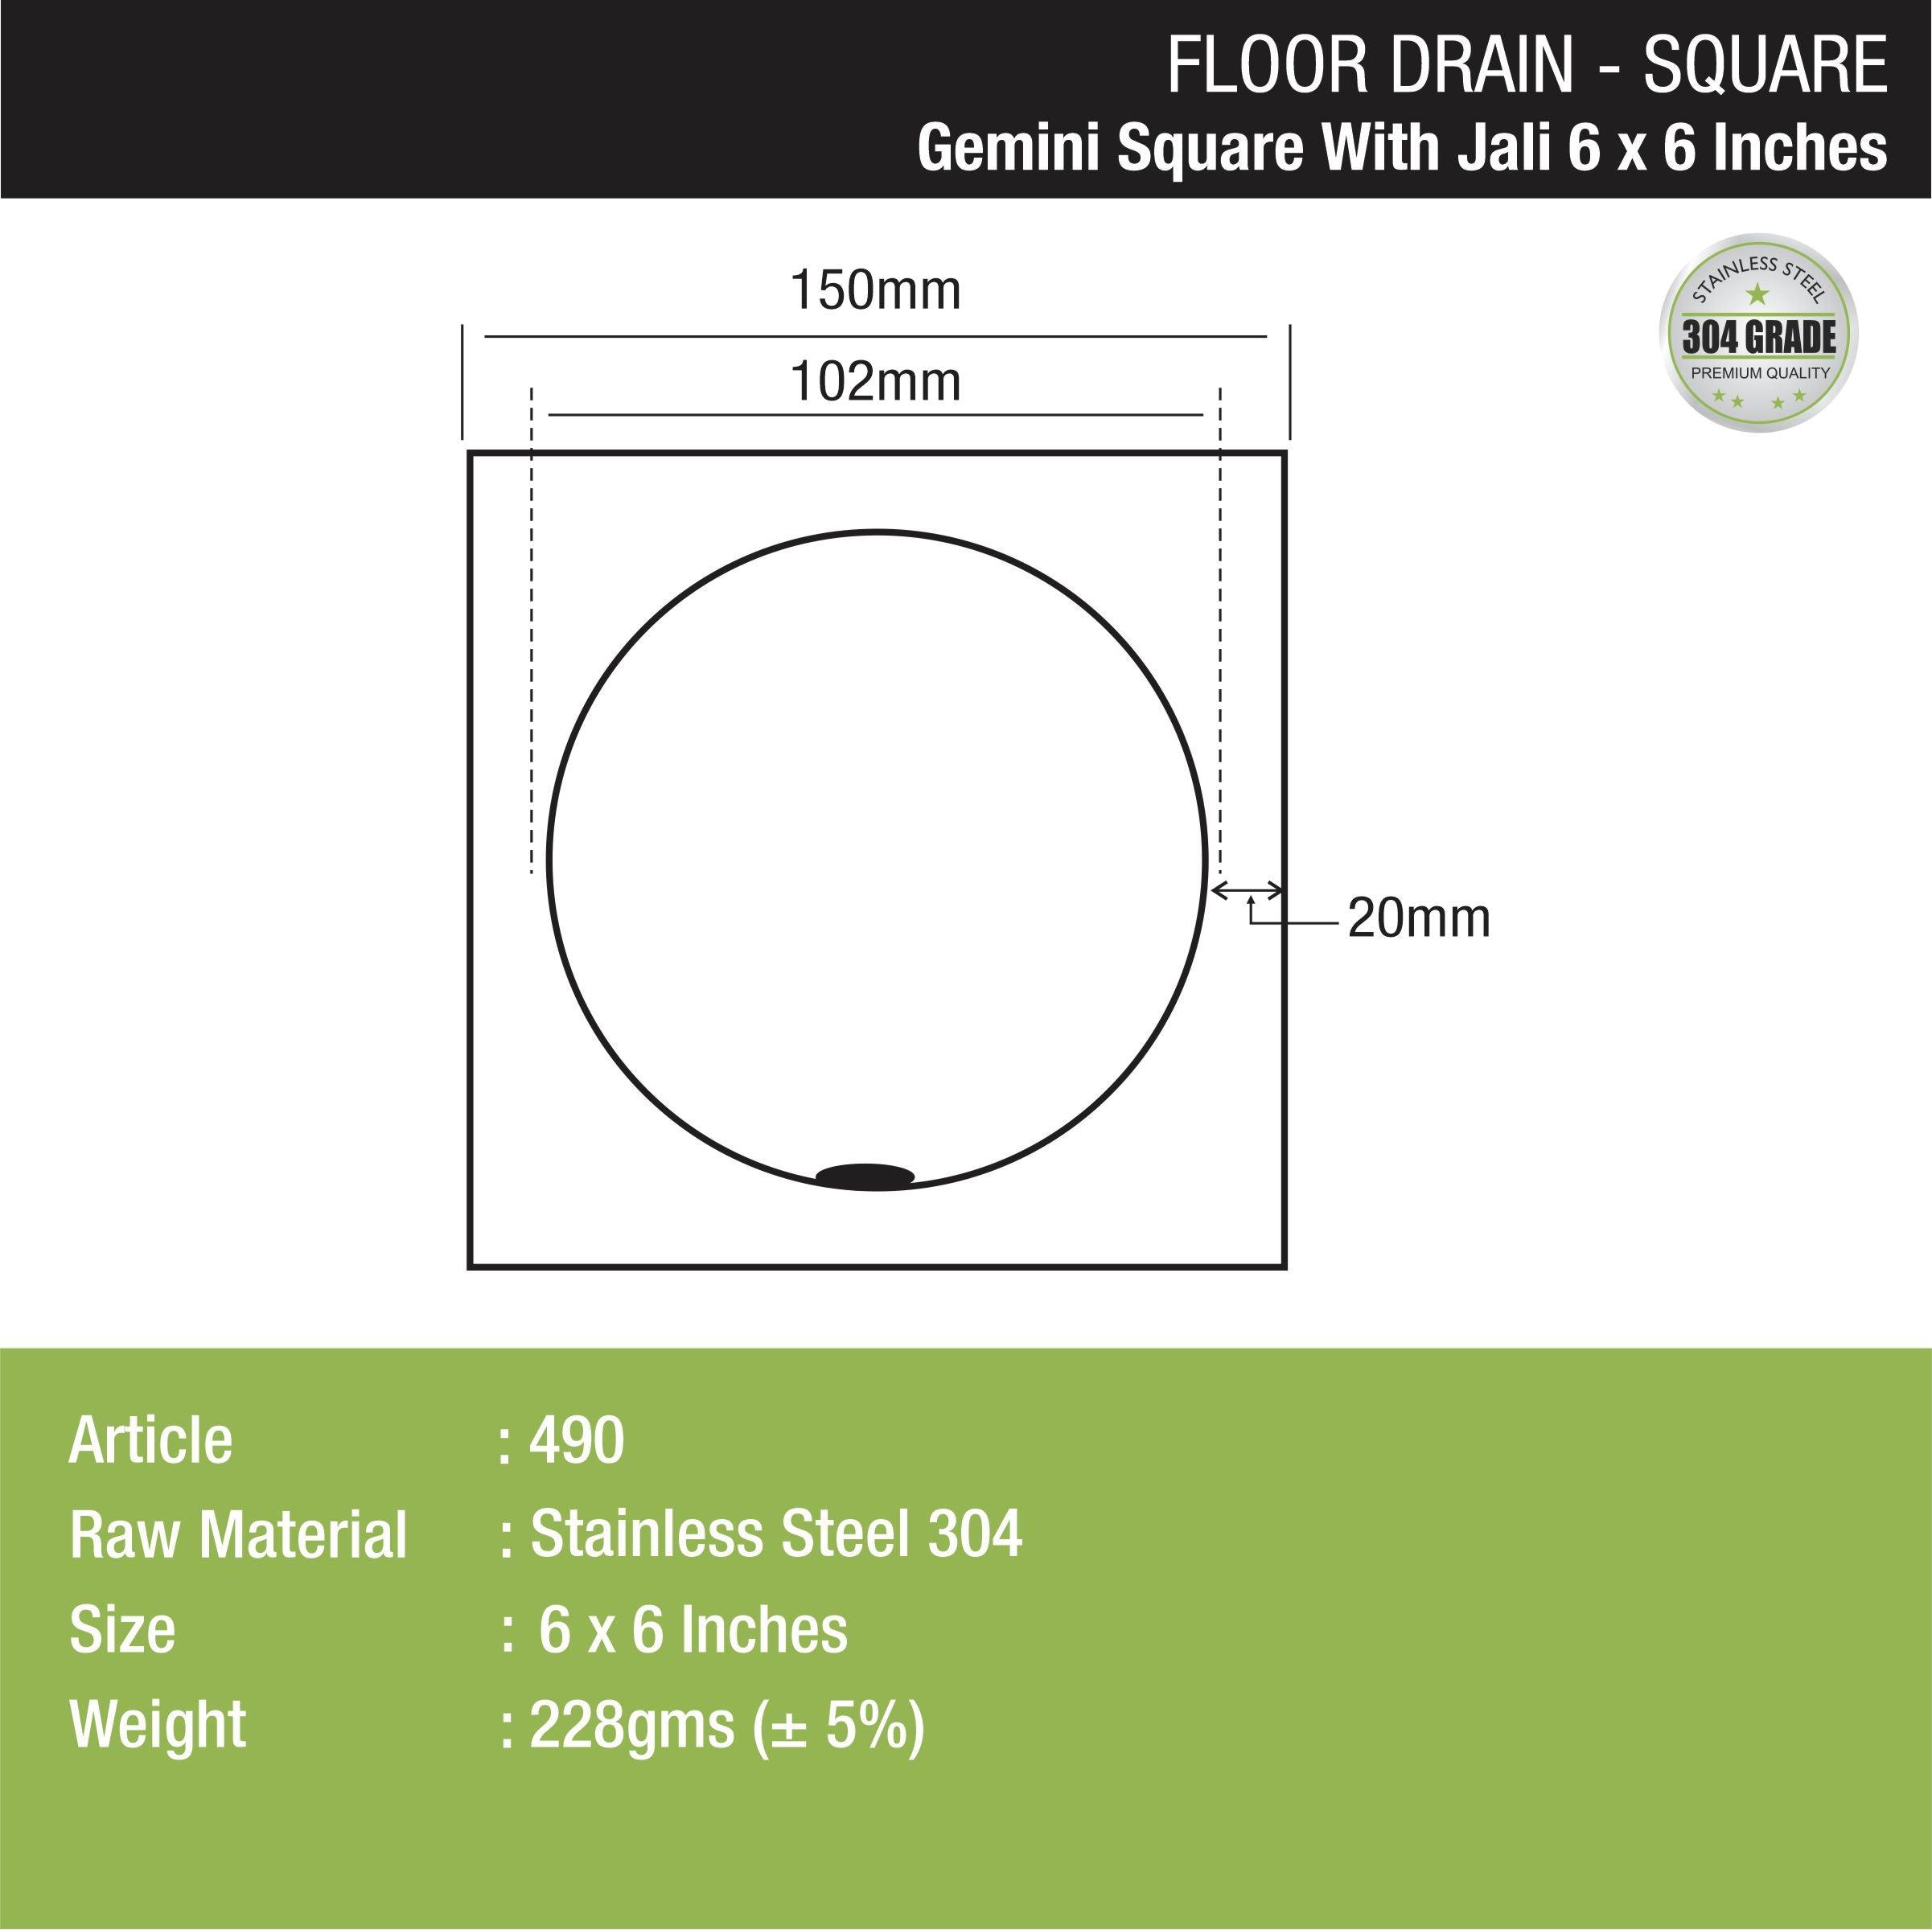 Gemini Square Floor Drain with Jali (6 x 6 Inches) dimensions and sizes